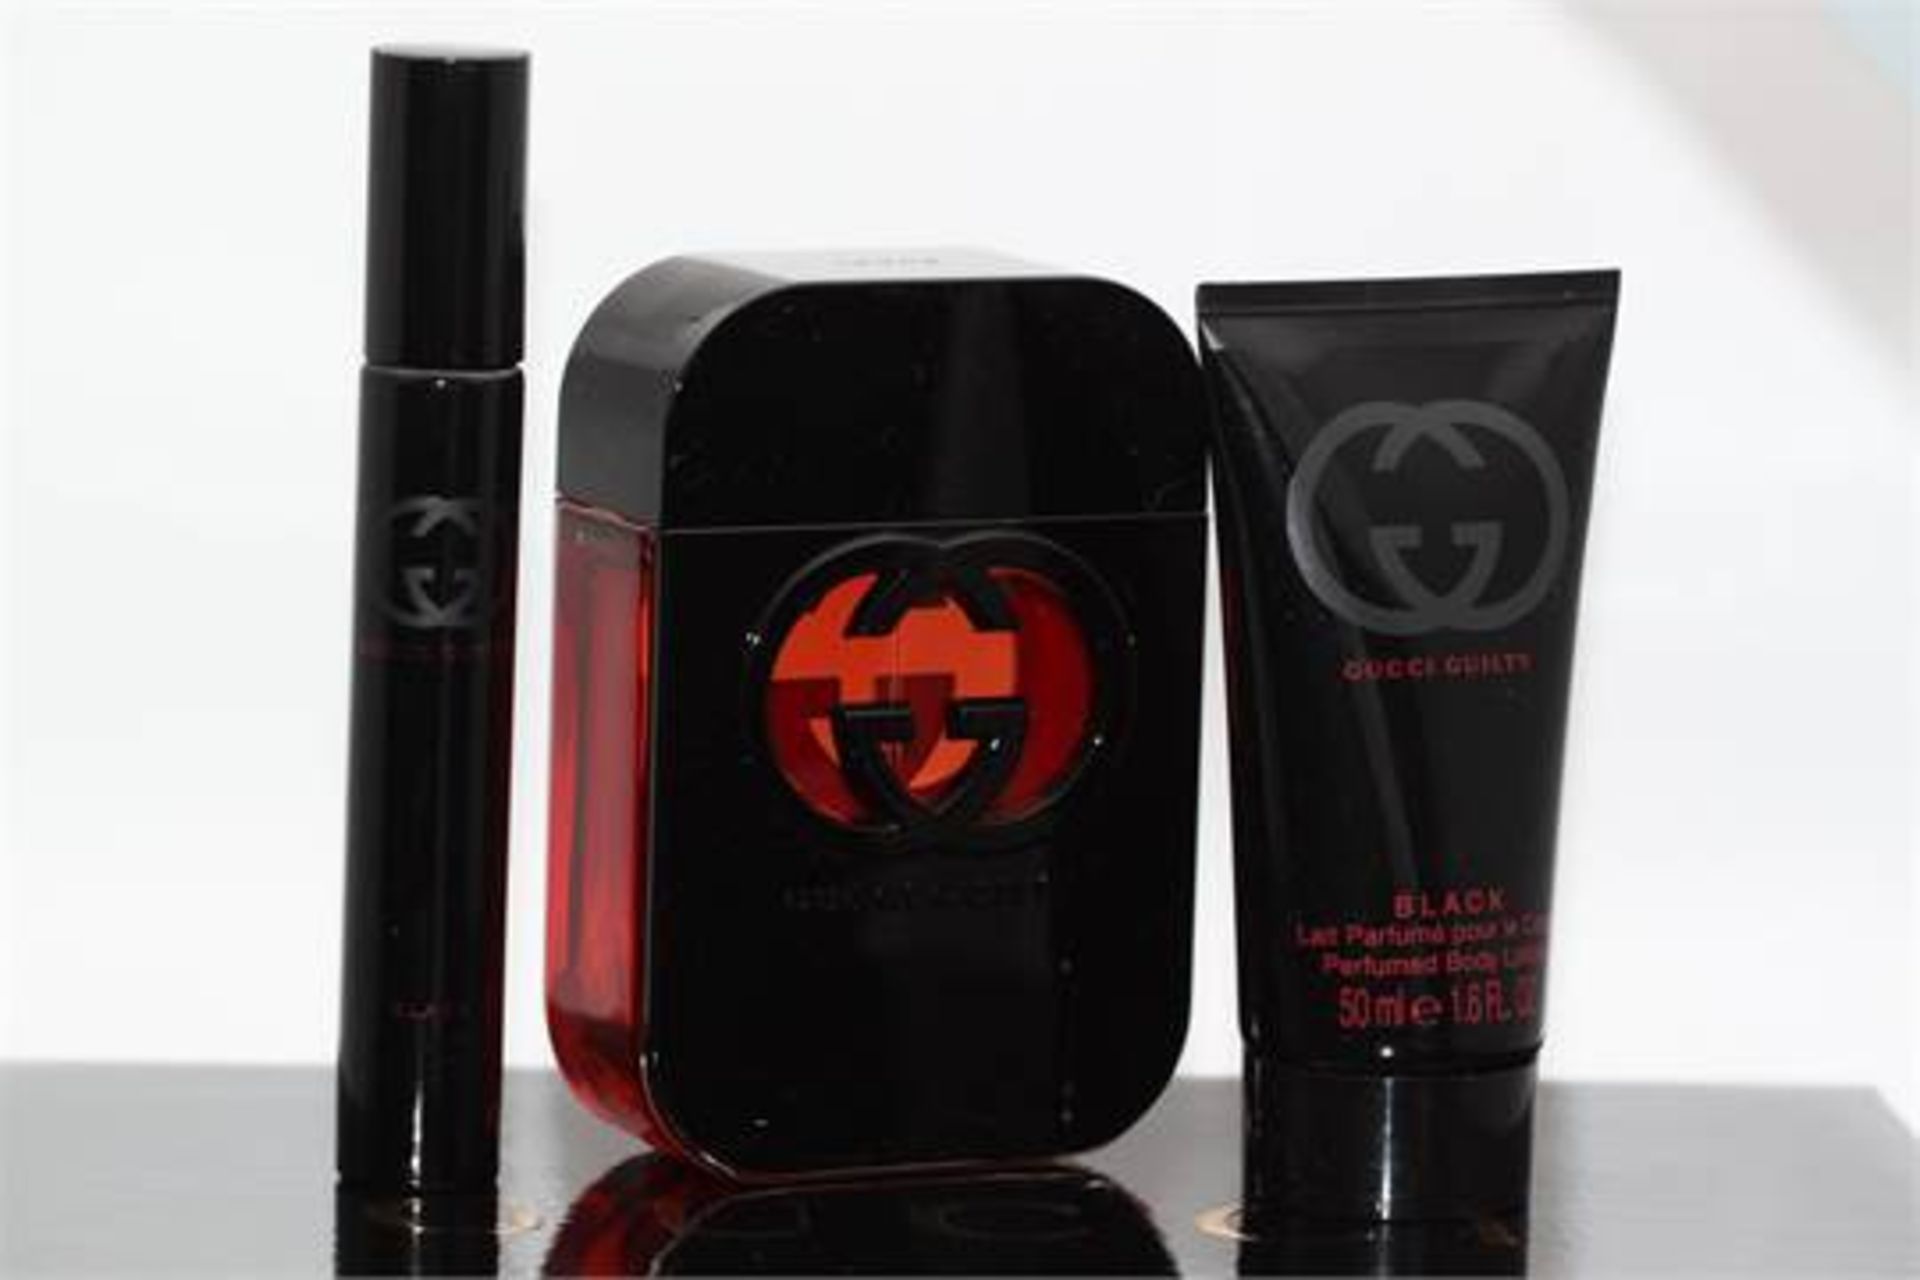 BOXED BRAND NEW THREE PIECE GUCCI GUILTY LADIES PERFUME GIFT SET, 75ML SET, RRP-£68.00 (DS-TLH-A) (